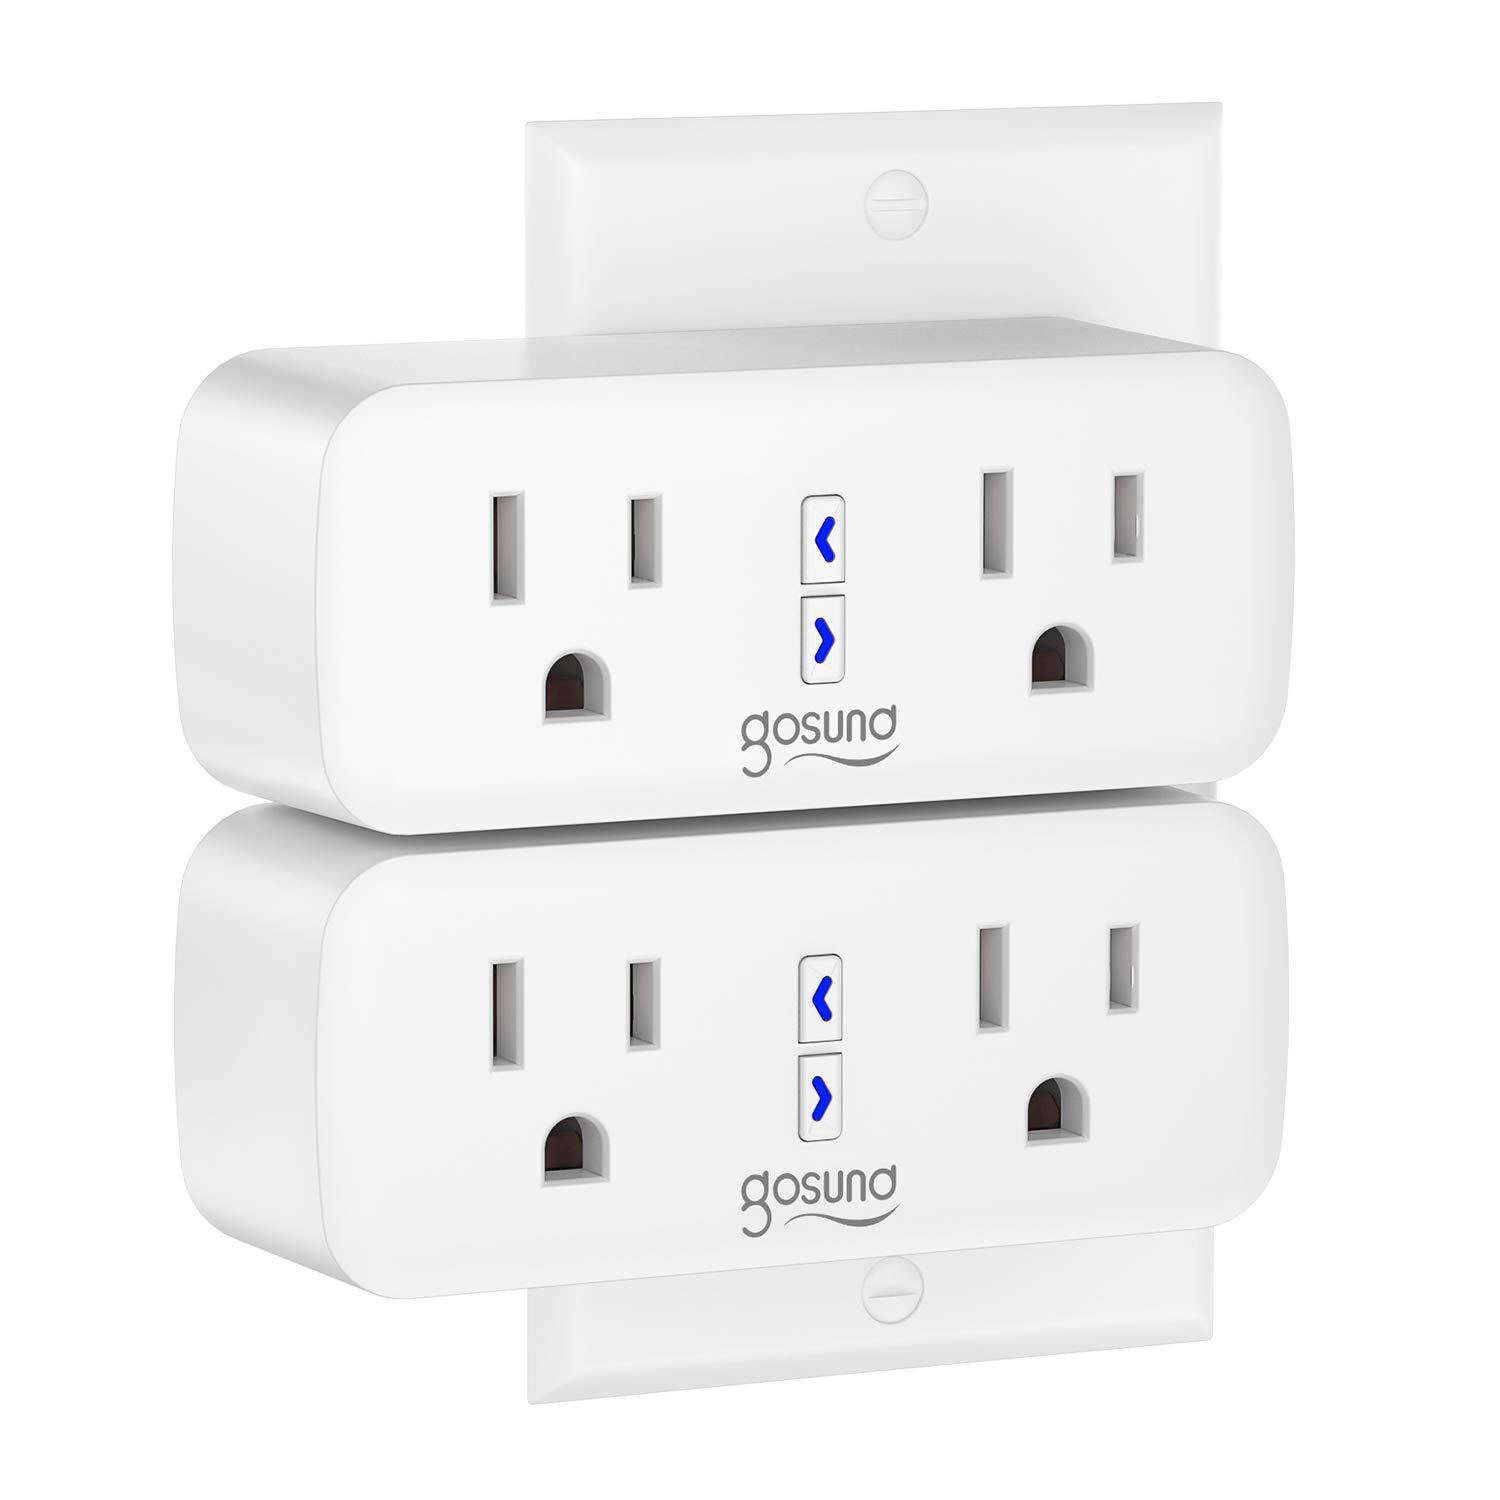 2 Smart Plug Gosund WiFi Outlets for $16.99